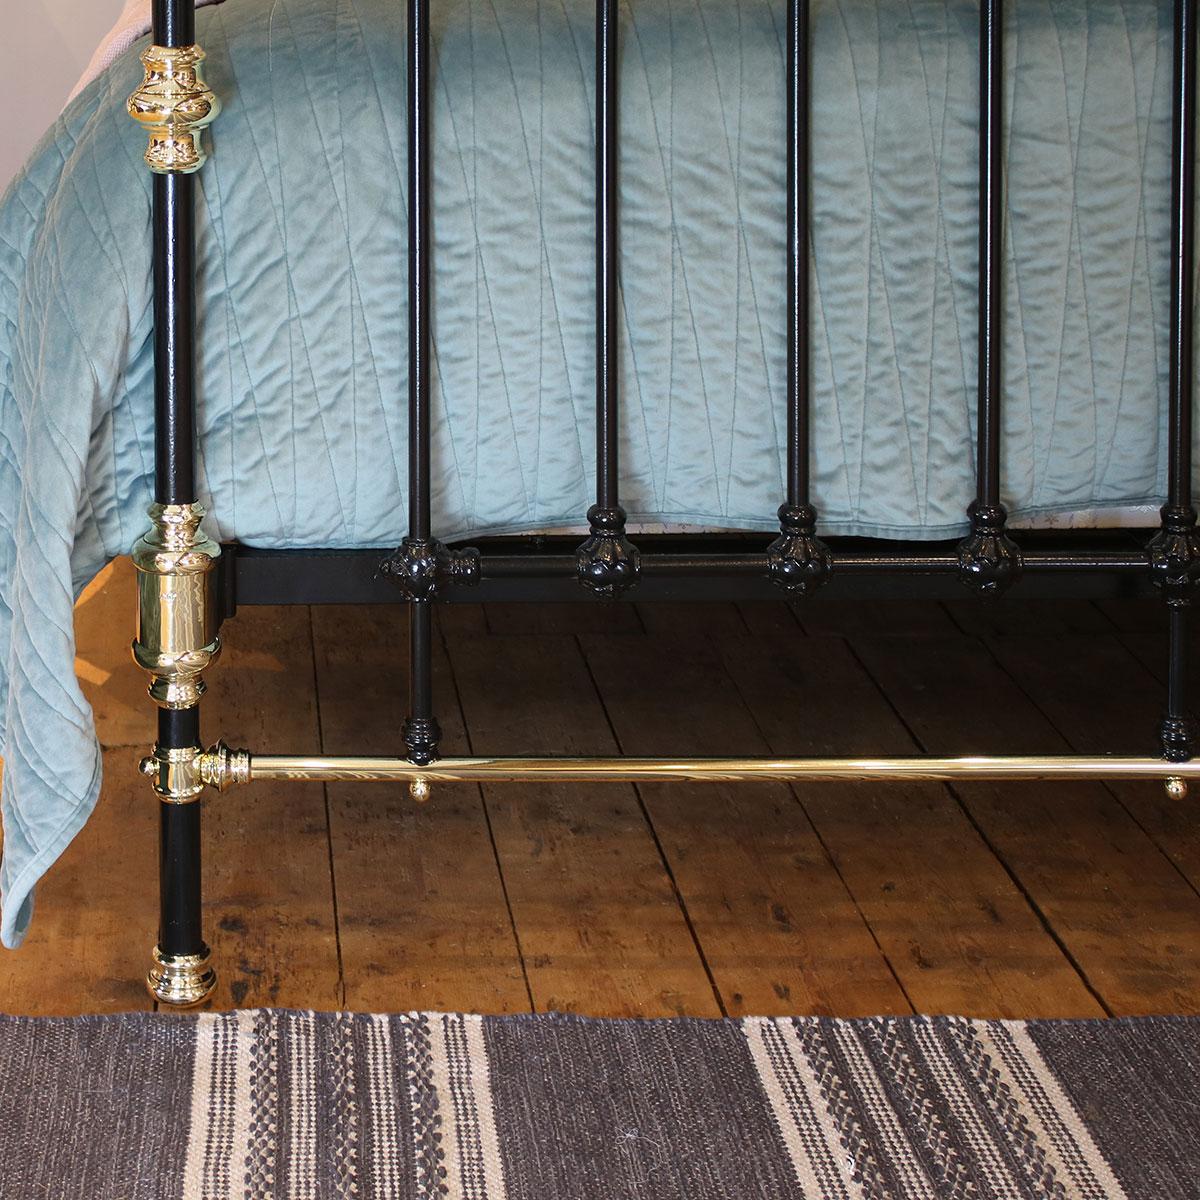 Antique bed in black with brass top rail, Classic design and brass decoration on the posts.

This bed accepts a UK King size or US Queen size (5ft, 60in or 150cm wide) base and mattress set.

The price includes a standard firm bed base to